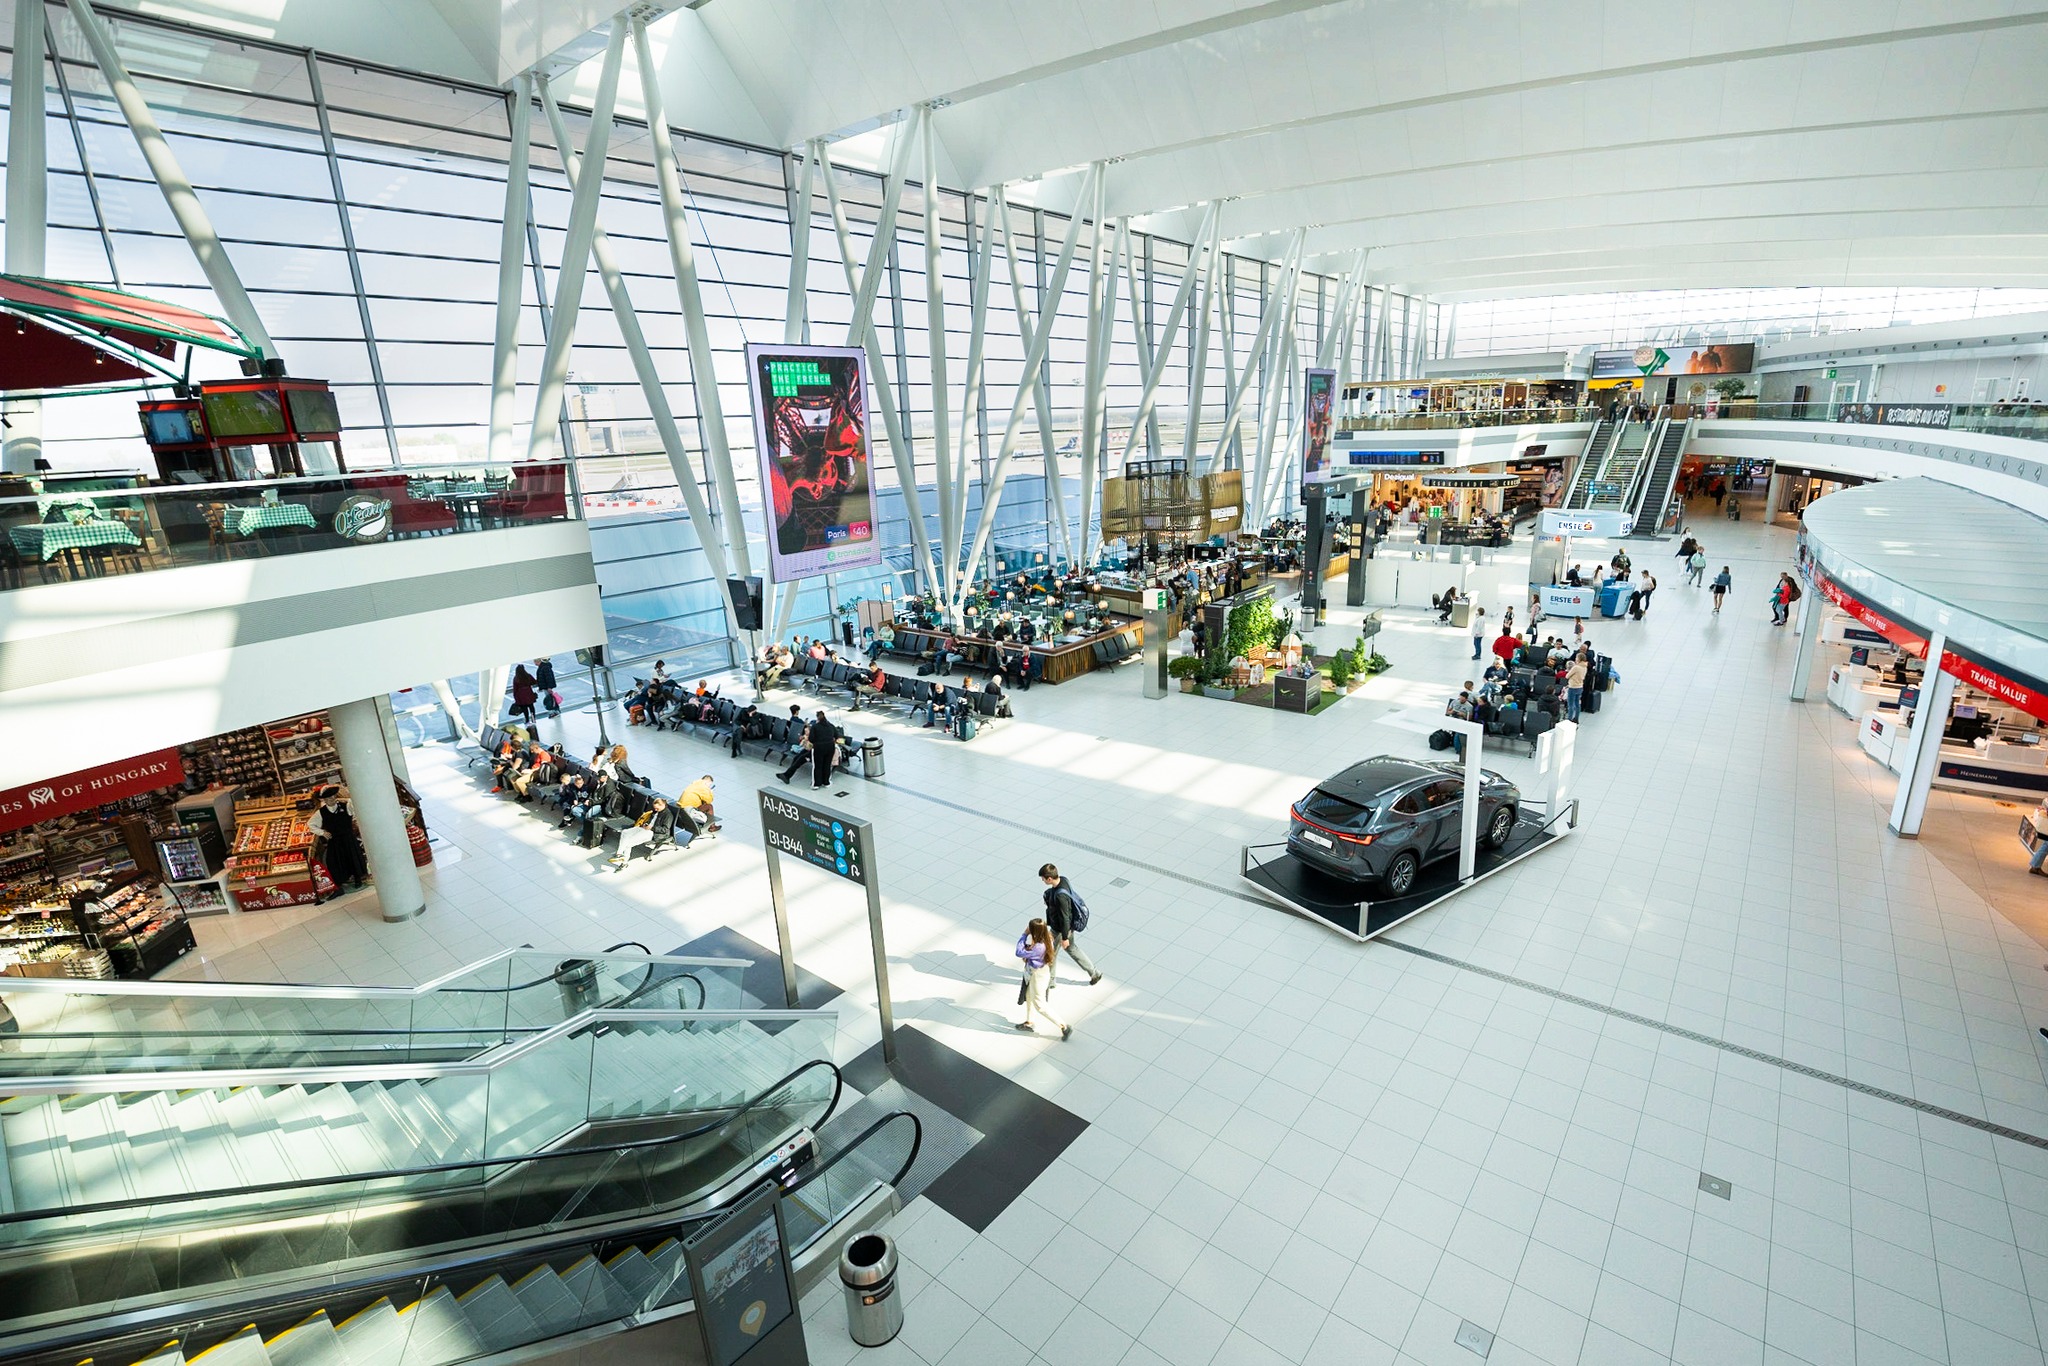 Budapest Airport Voted Best for Passengers in Europe